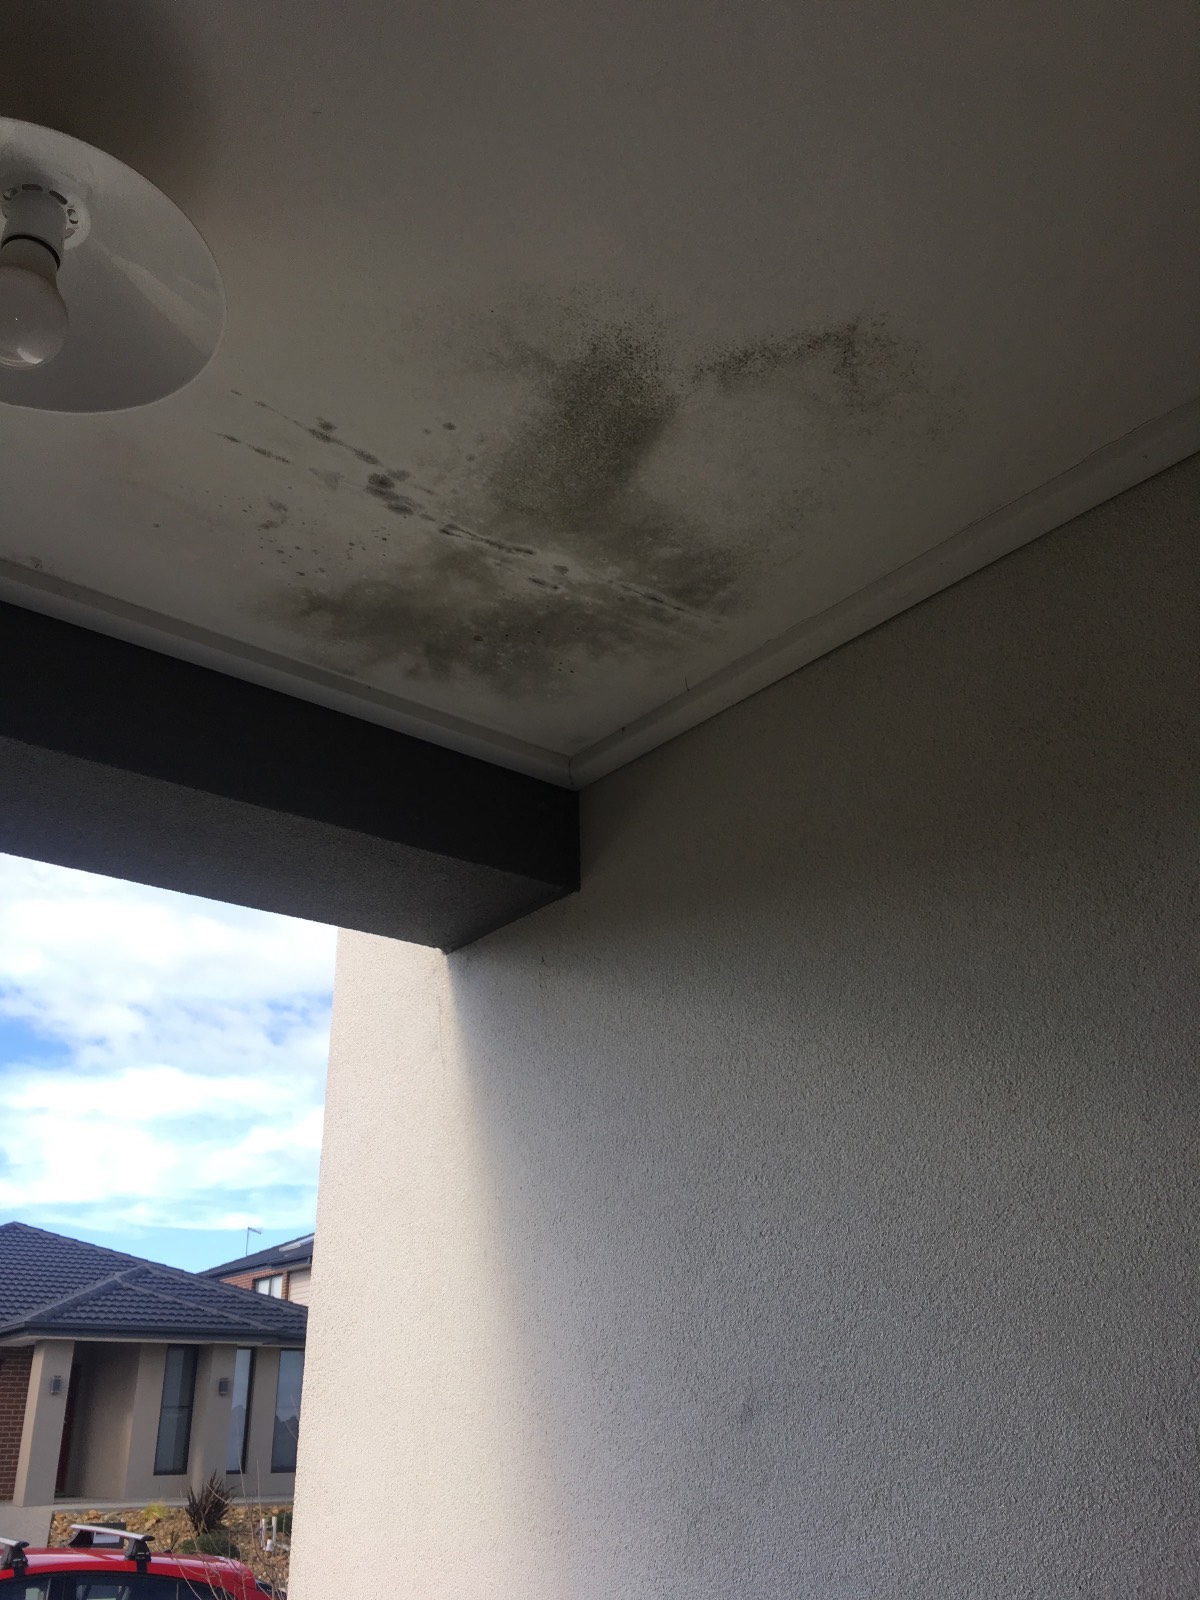 Leaking Roof - ongoing issue with Sienna Homes